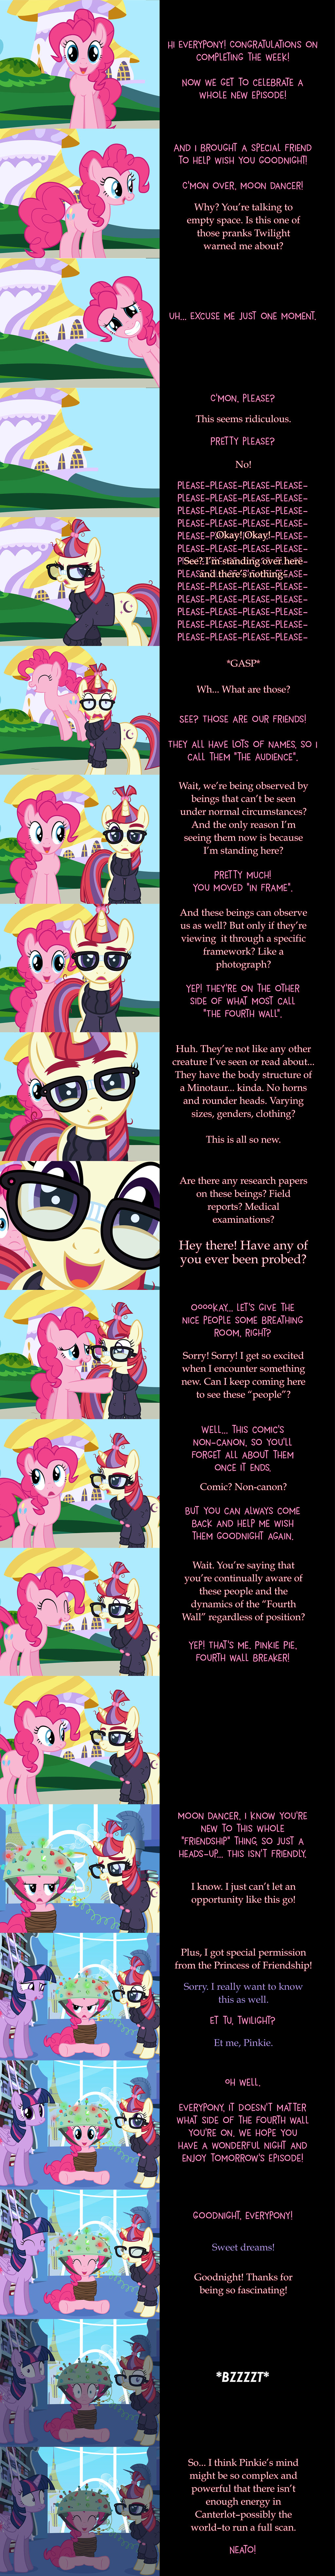 Pinkie Pie Says Goodnight: The Fourth Wall